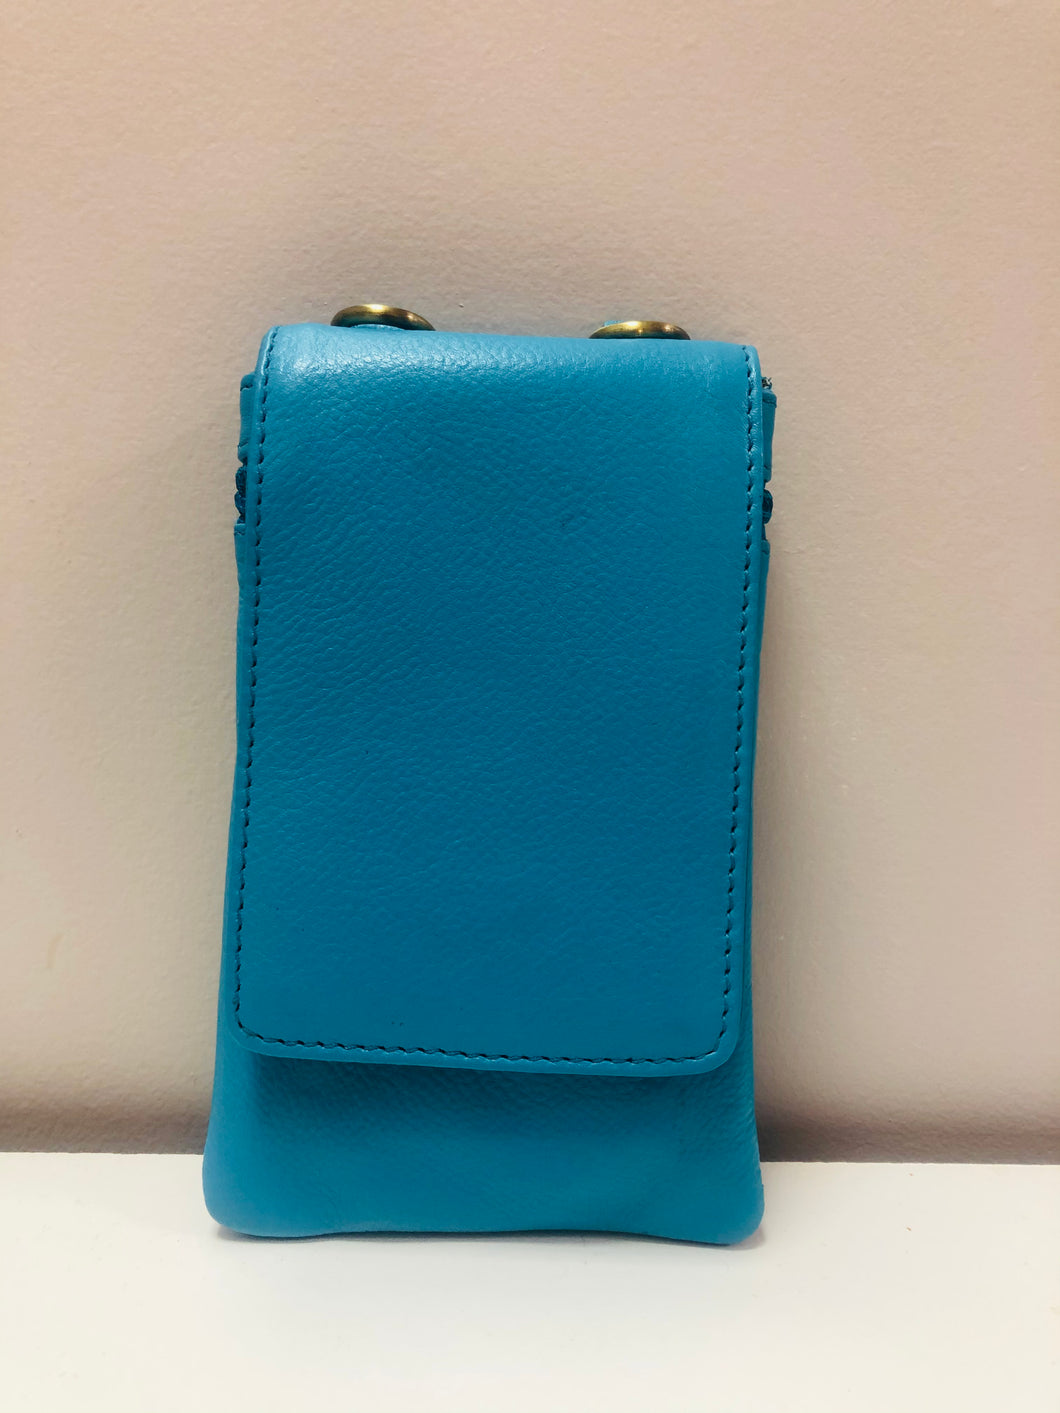 Teal Cell Phone Purse